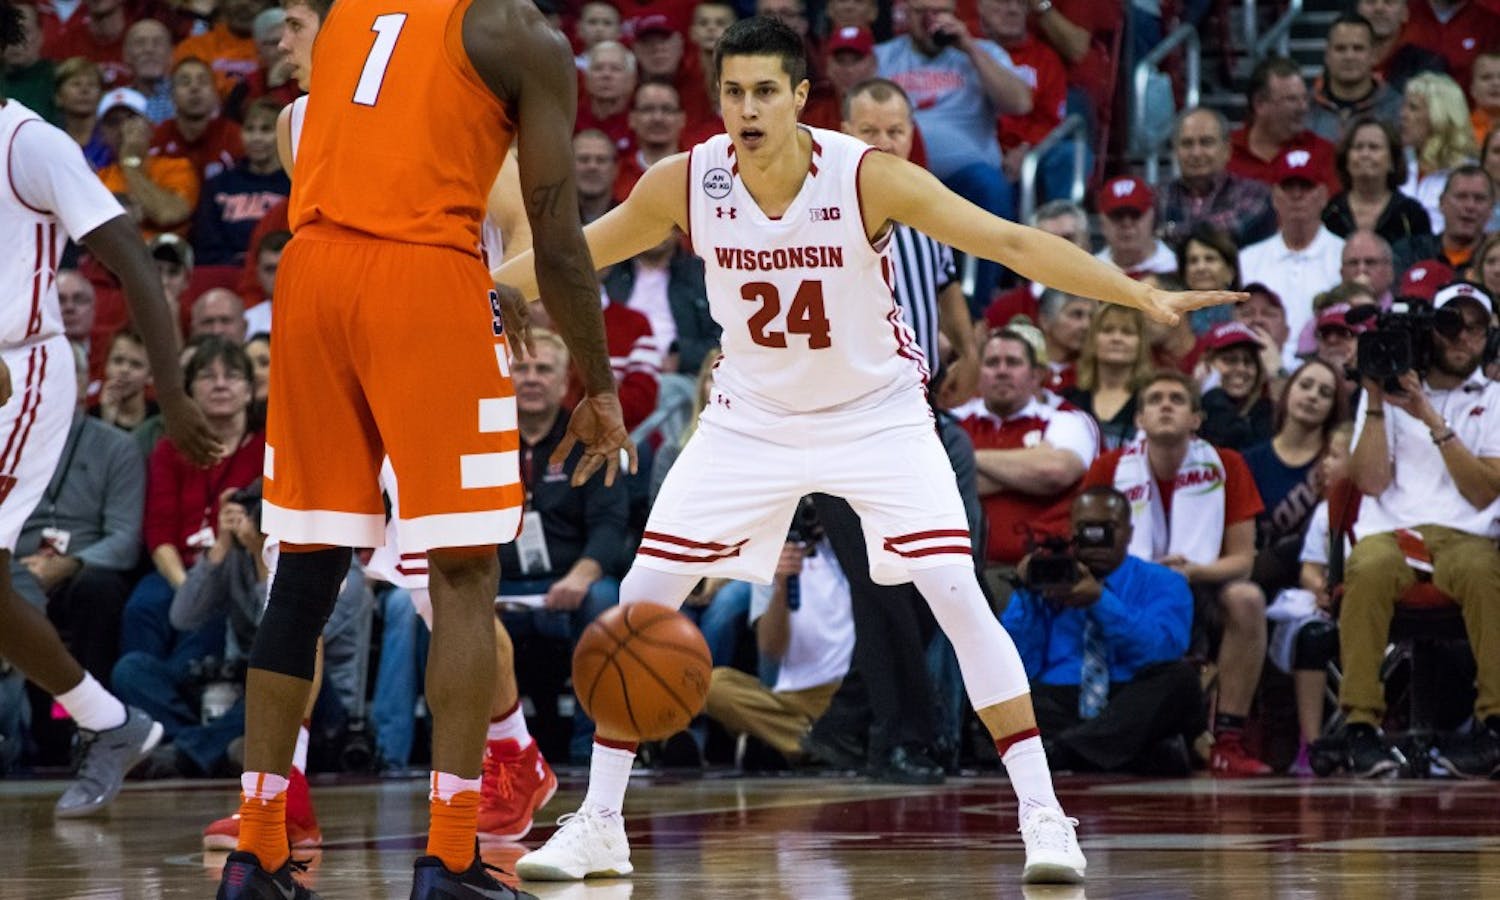 Koenig scored nine points in his return and keyed a Badger run in the second half.&nbsp;